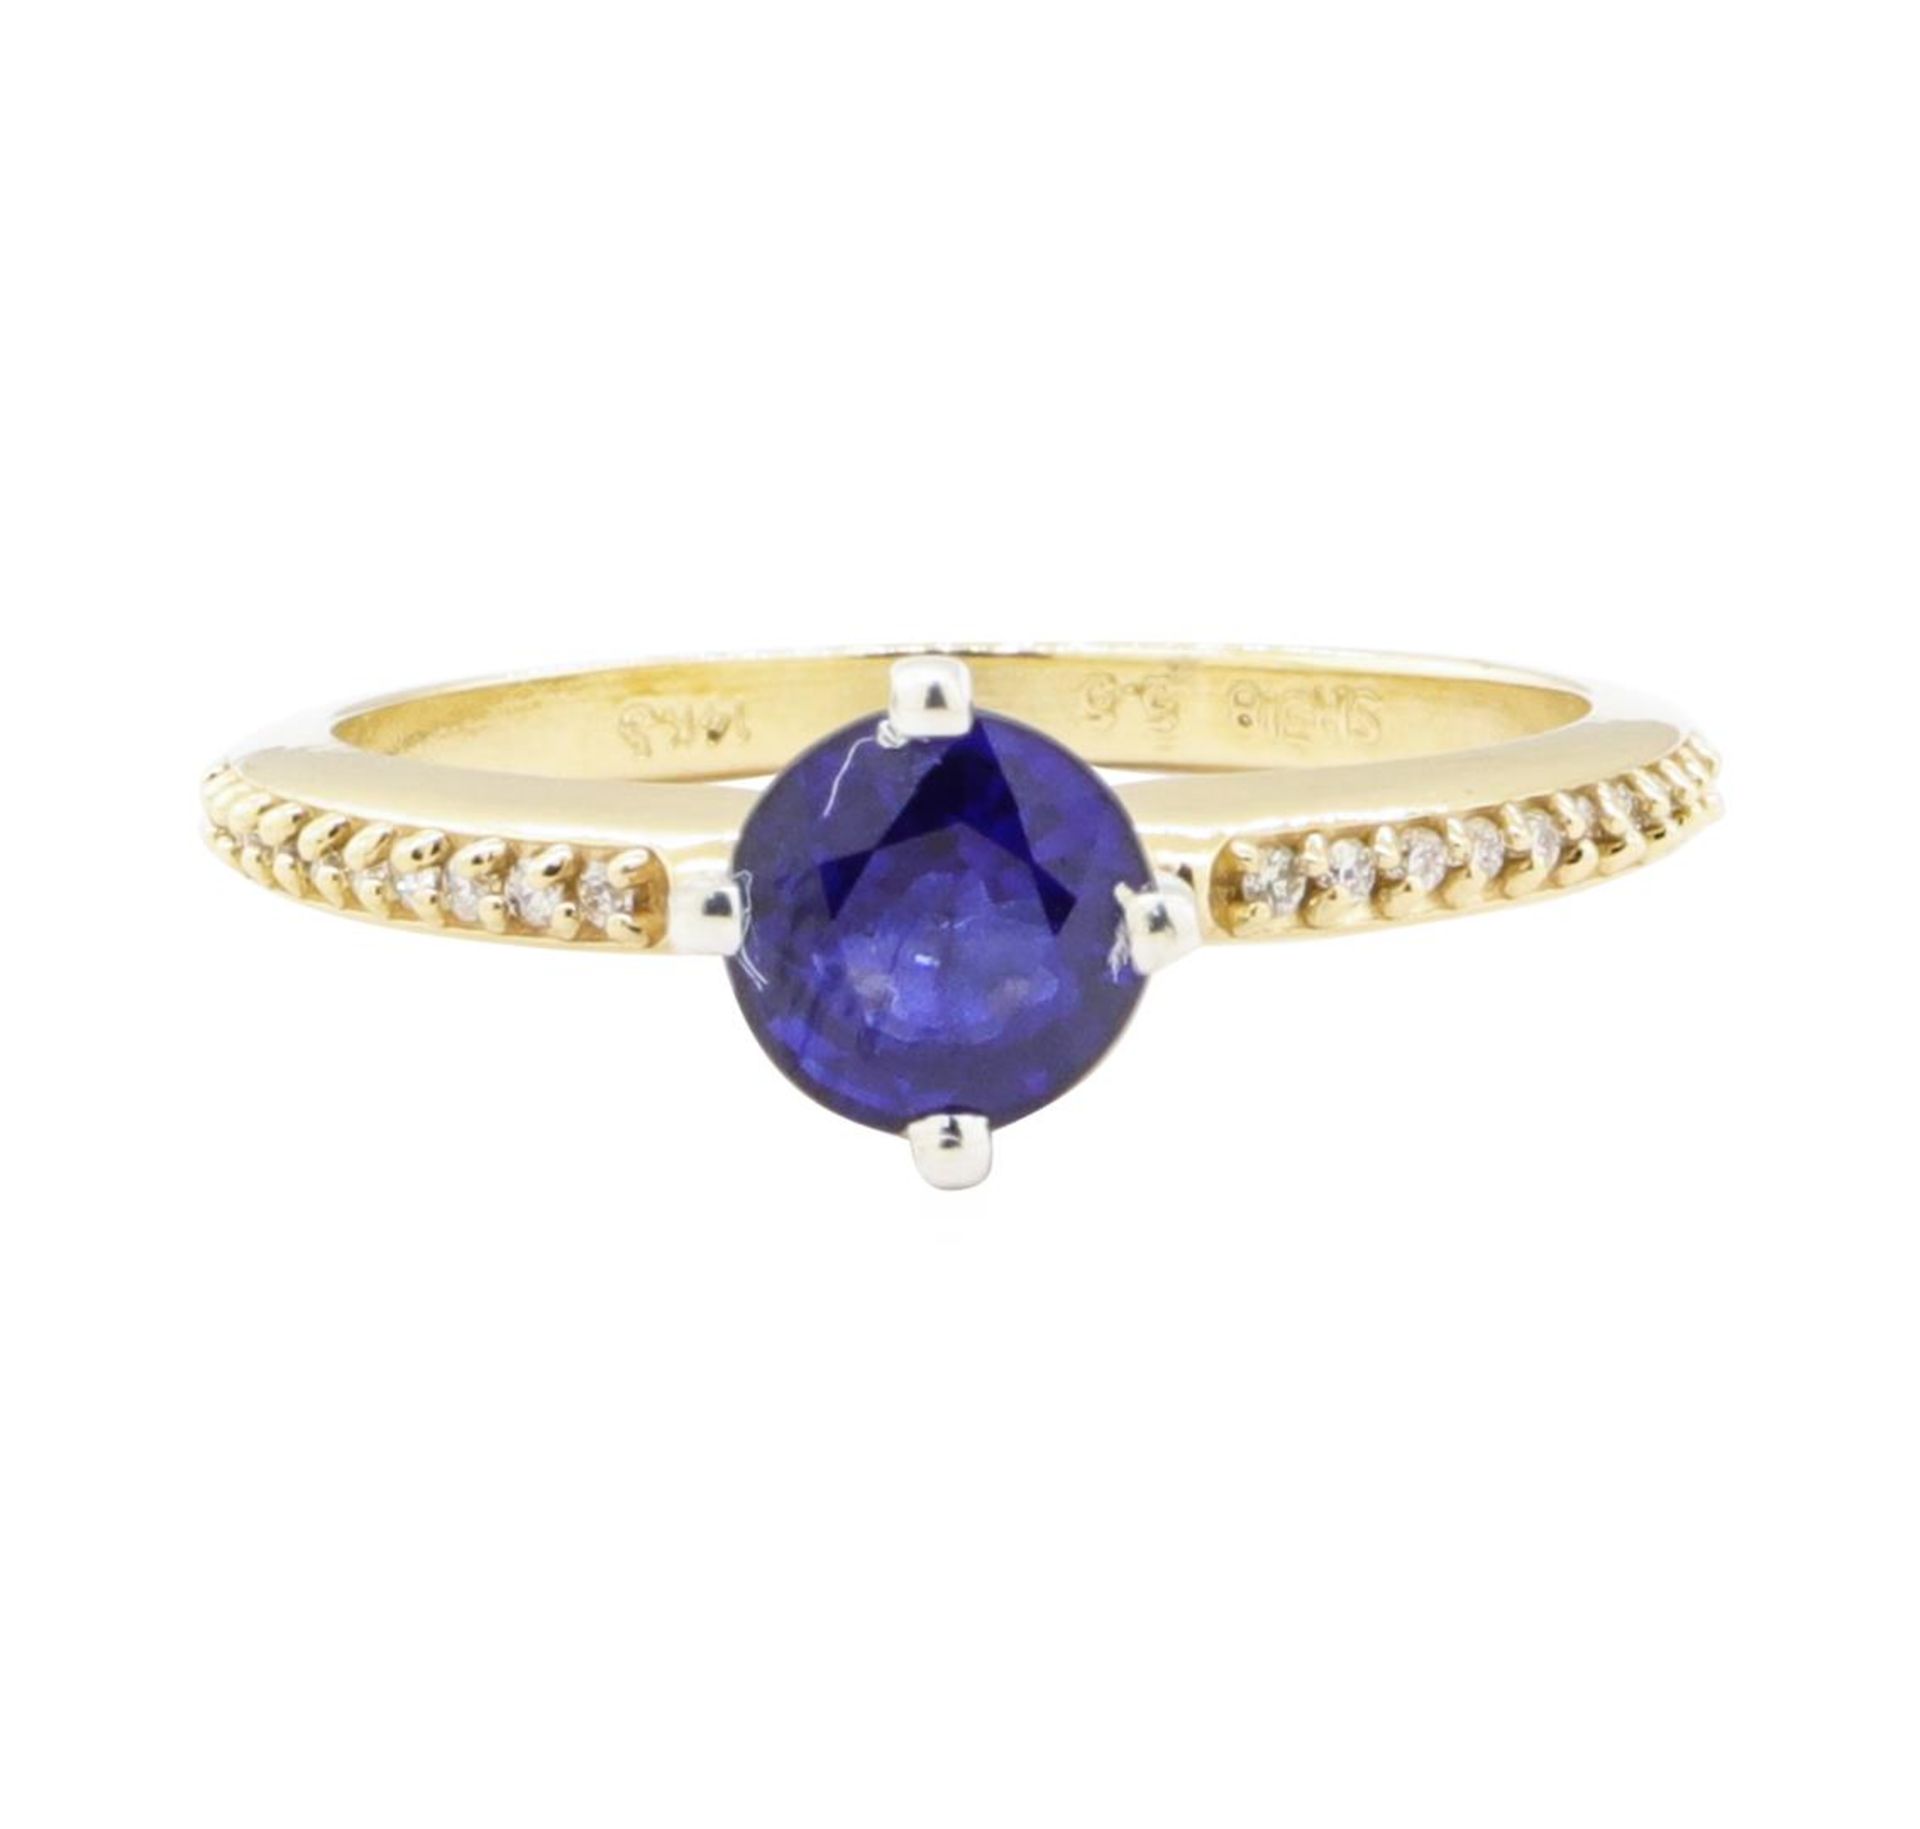 1.52 ctw Sapphire and Diamond Ring - 14KT Yellow Gold - Image 2 of 4